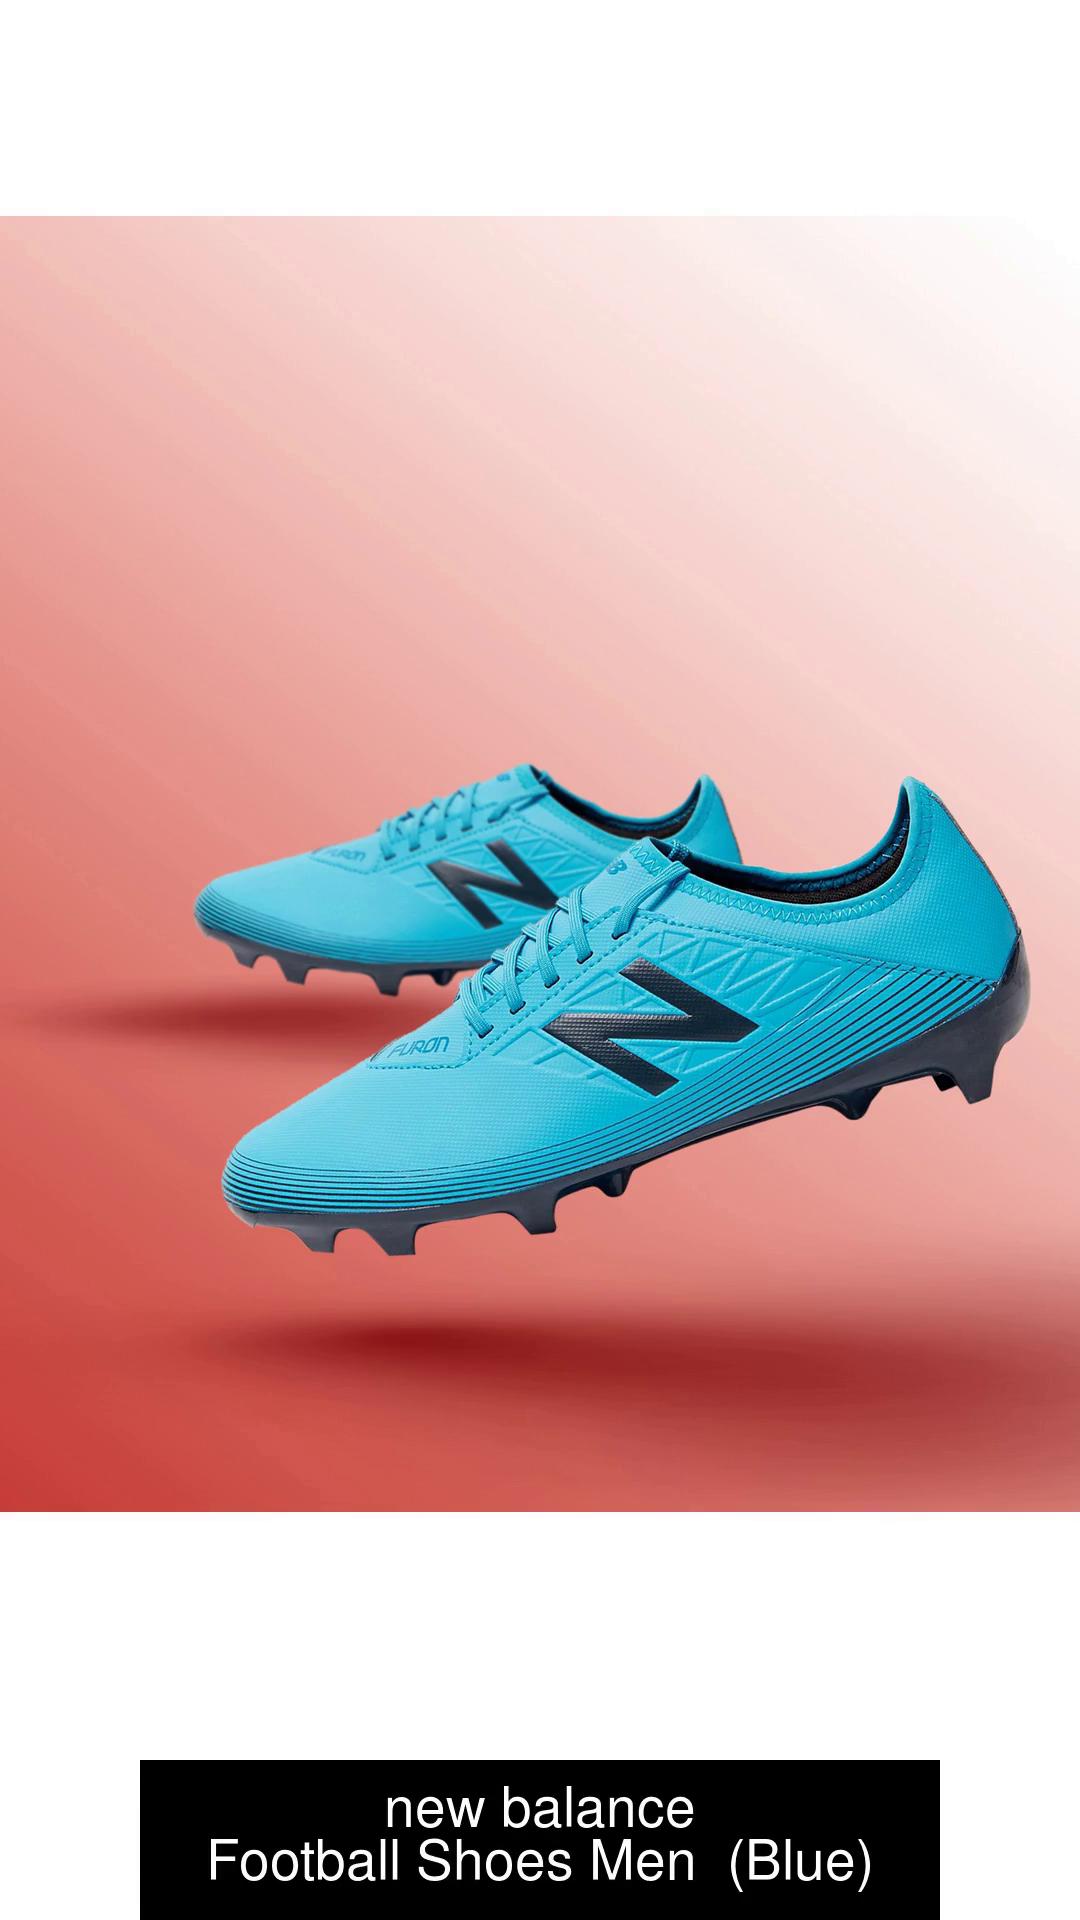 New Balance FURON Football Shoes For Men Buy New Balance FURON Football  Shoes For Men Online at Best Price Shop Online for Footwears in India 